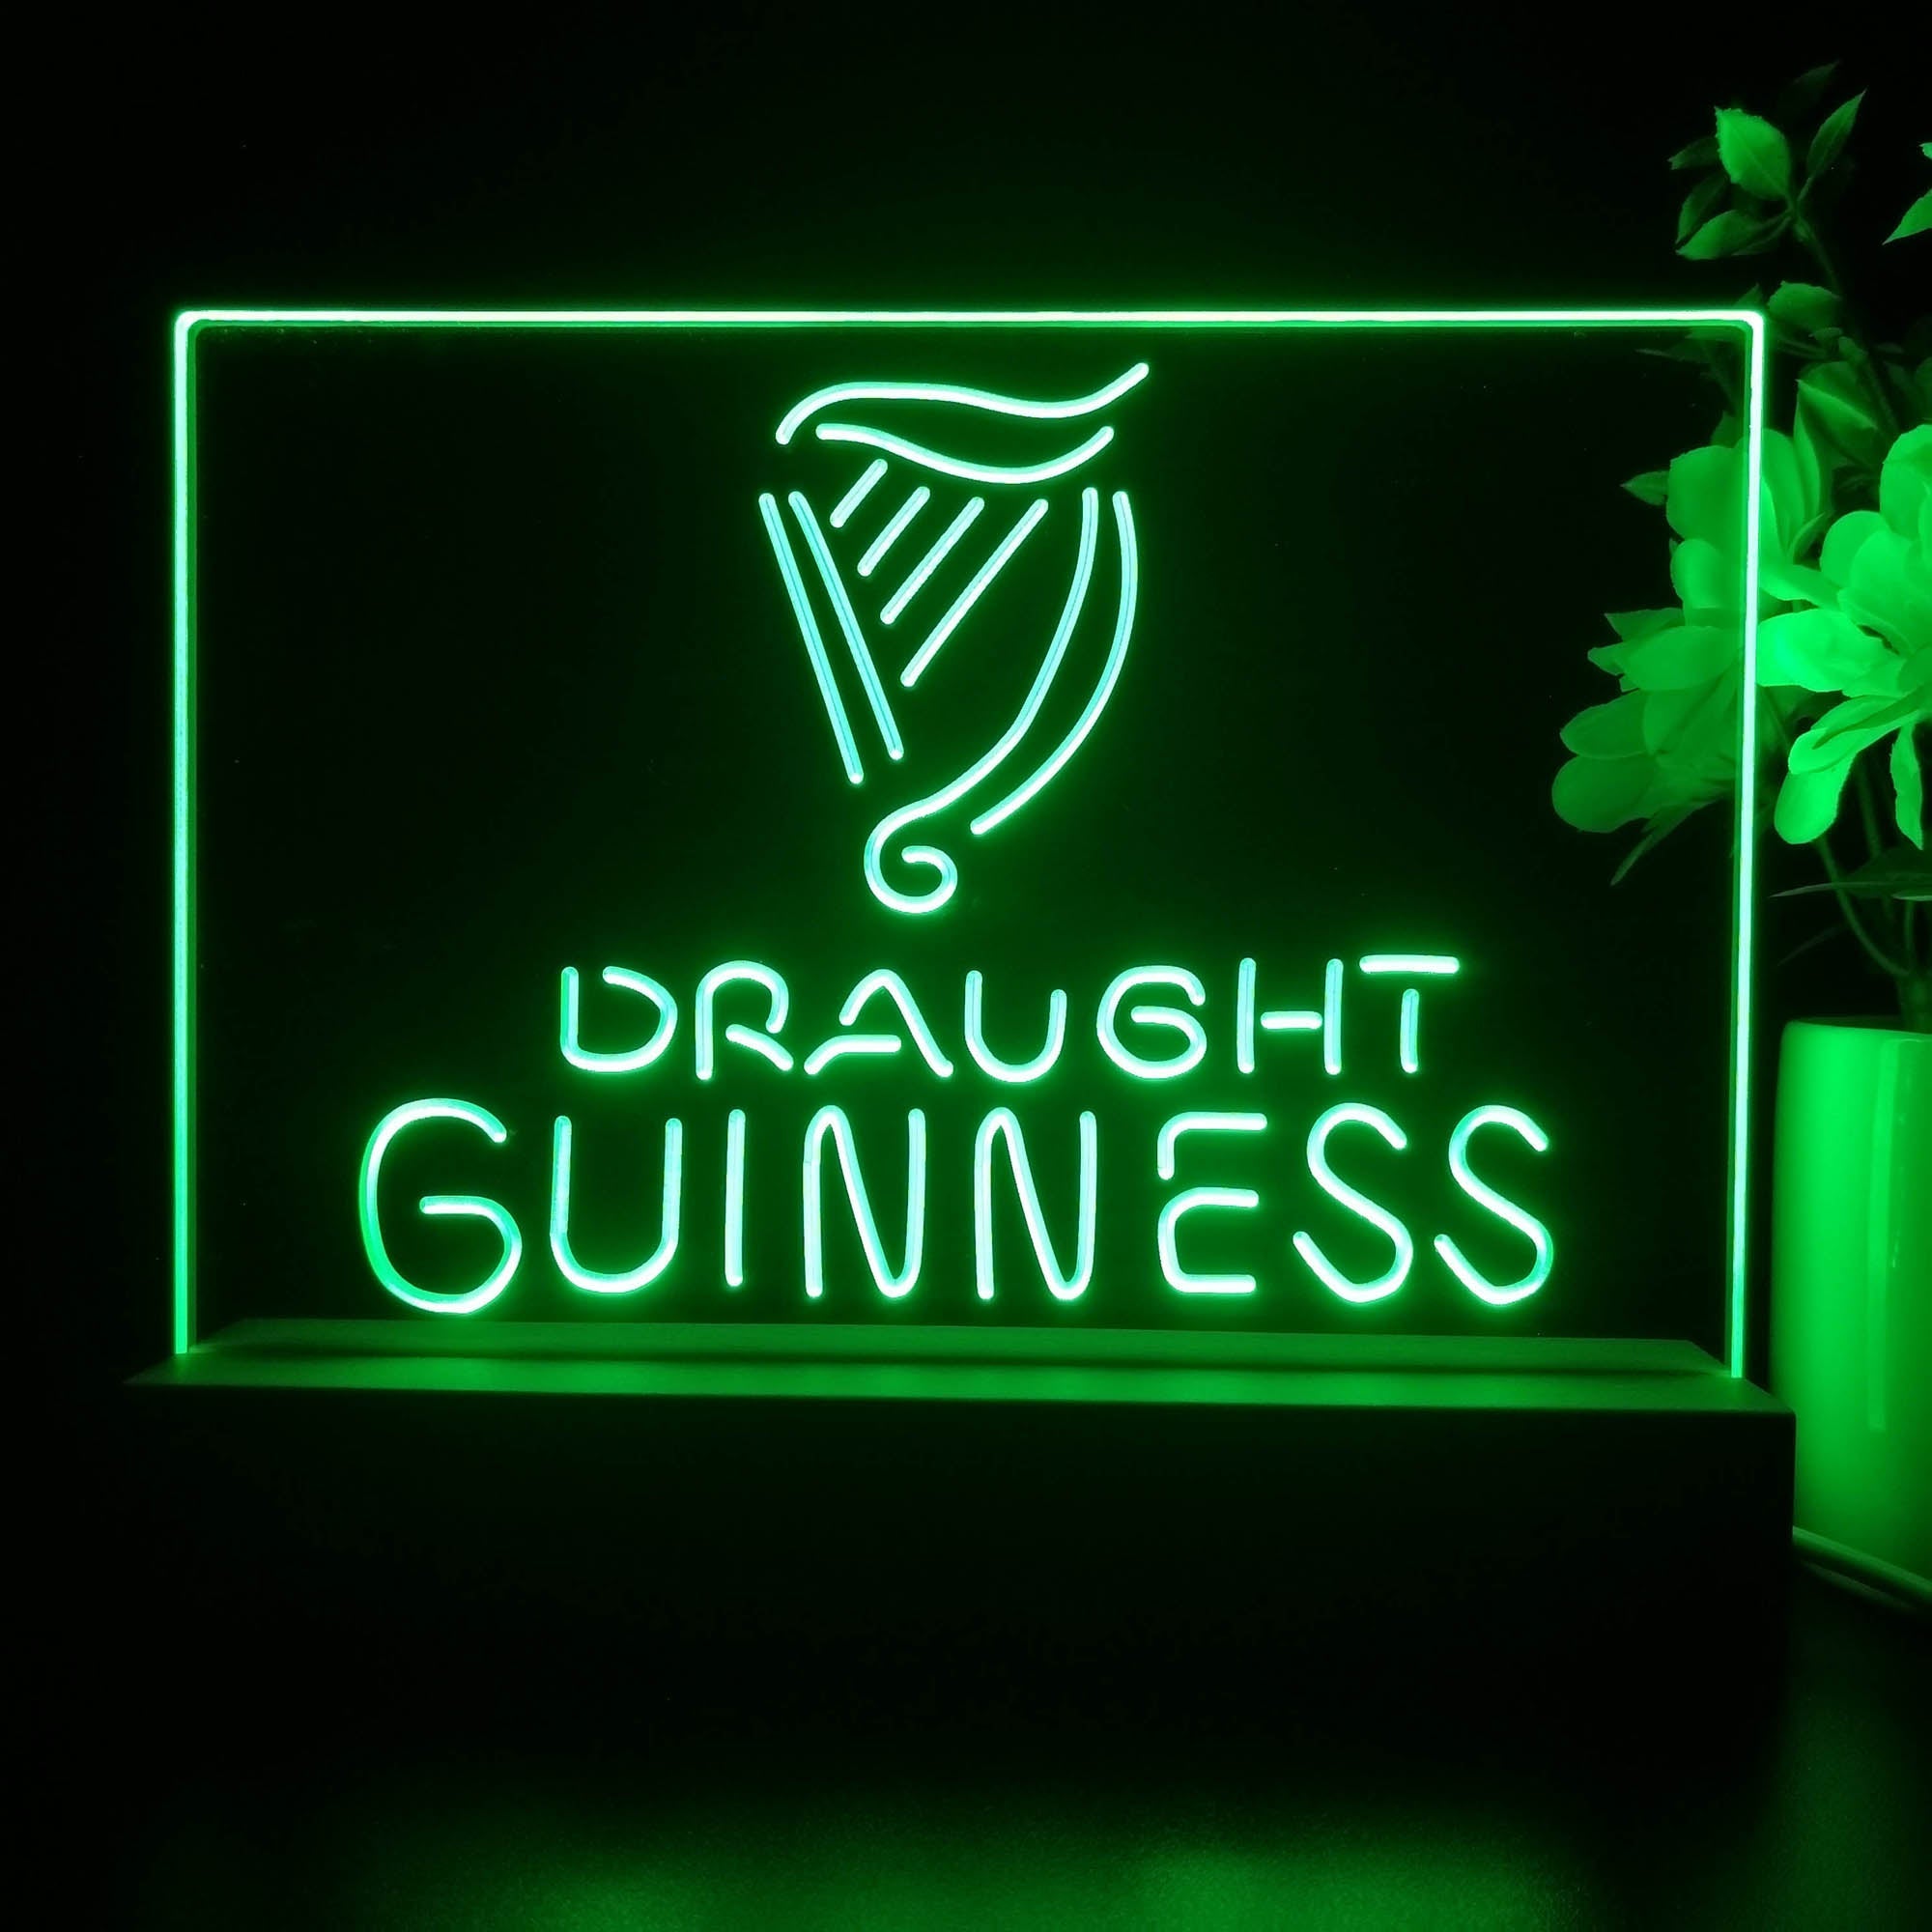 Guinness Draught on tap Neon Sign Pub Bar Lamp